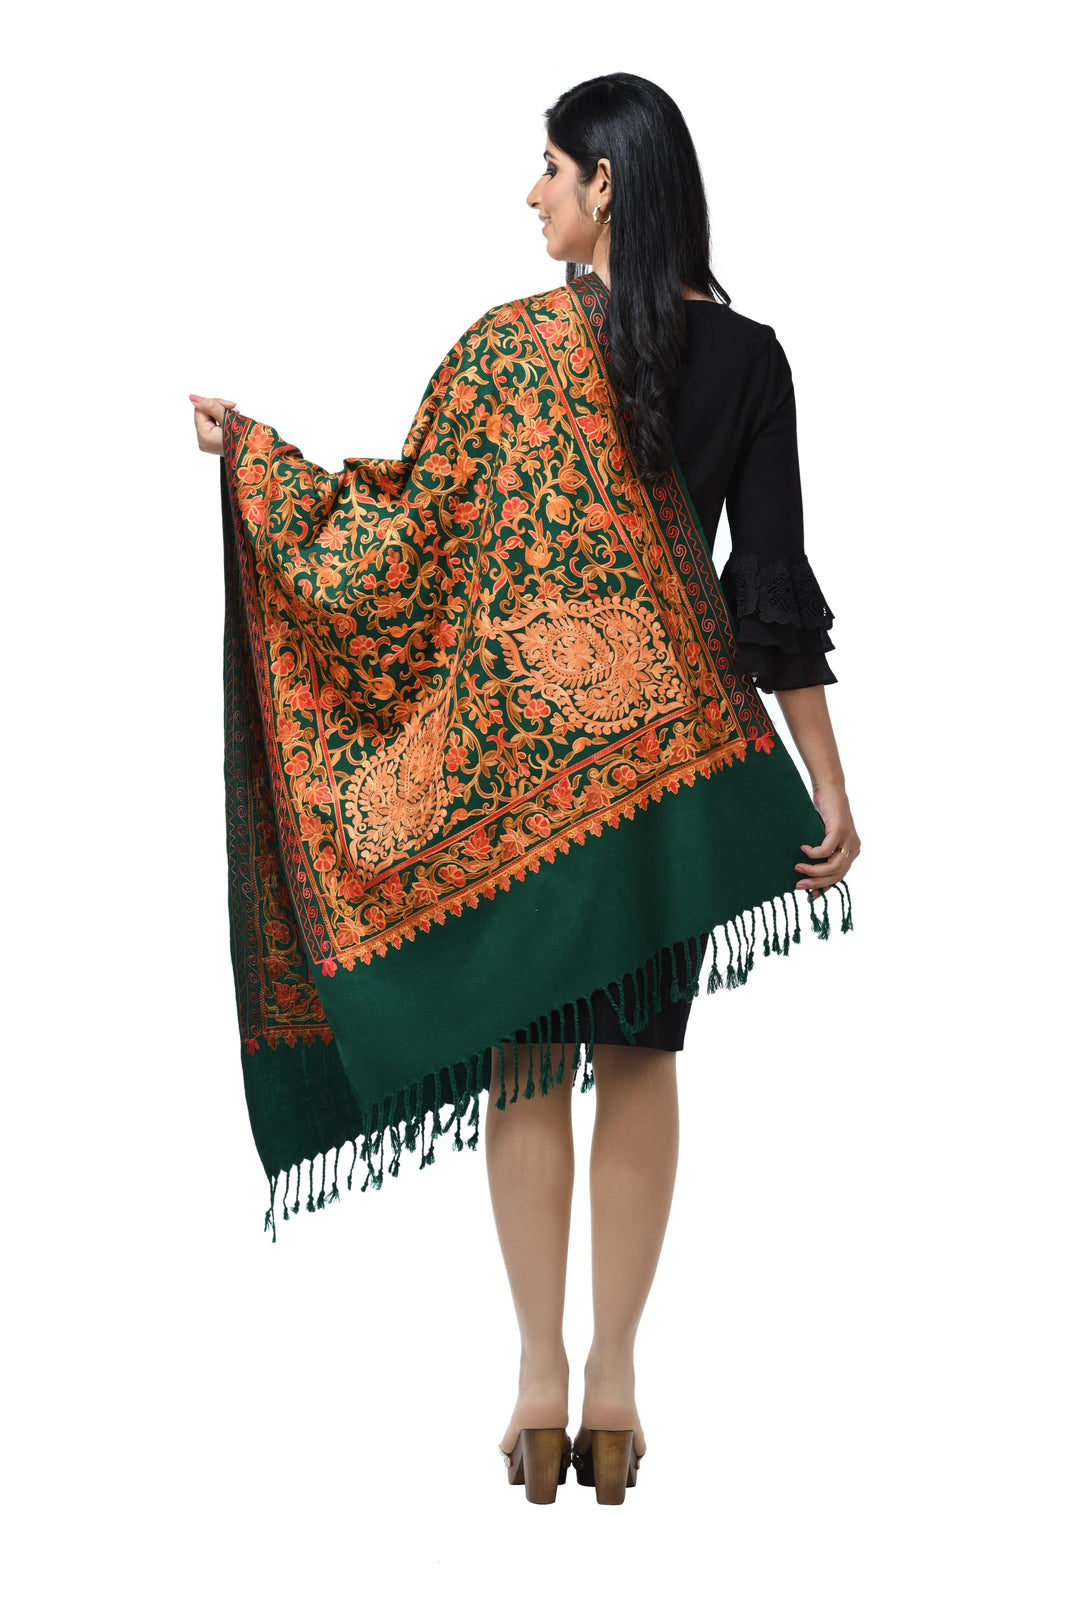 Pashwool Womens Stoles and Scarves Scarf Pashwool Womens Kashmiri Embroidery Stole, Soft And Warm, Woollen Stole Green